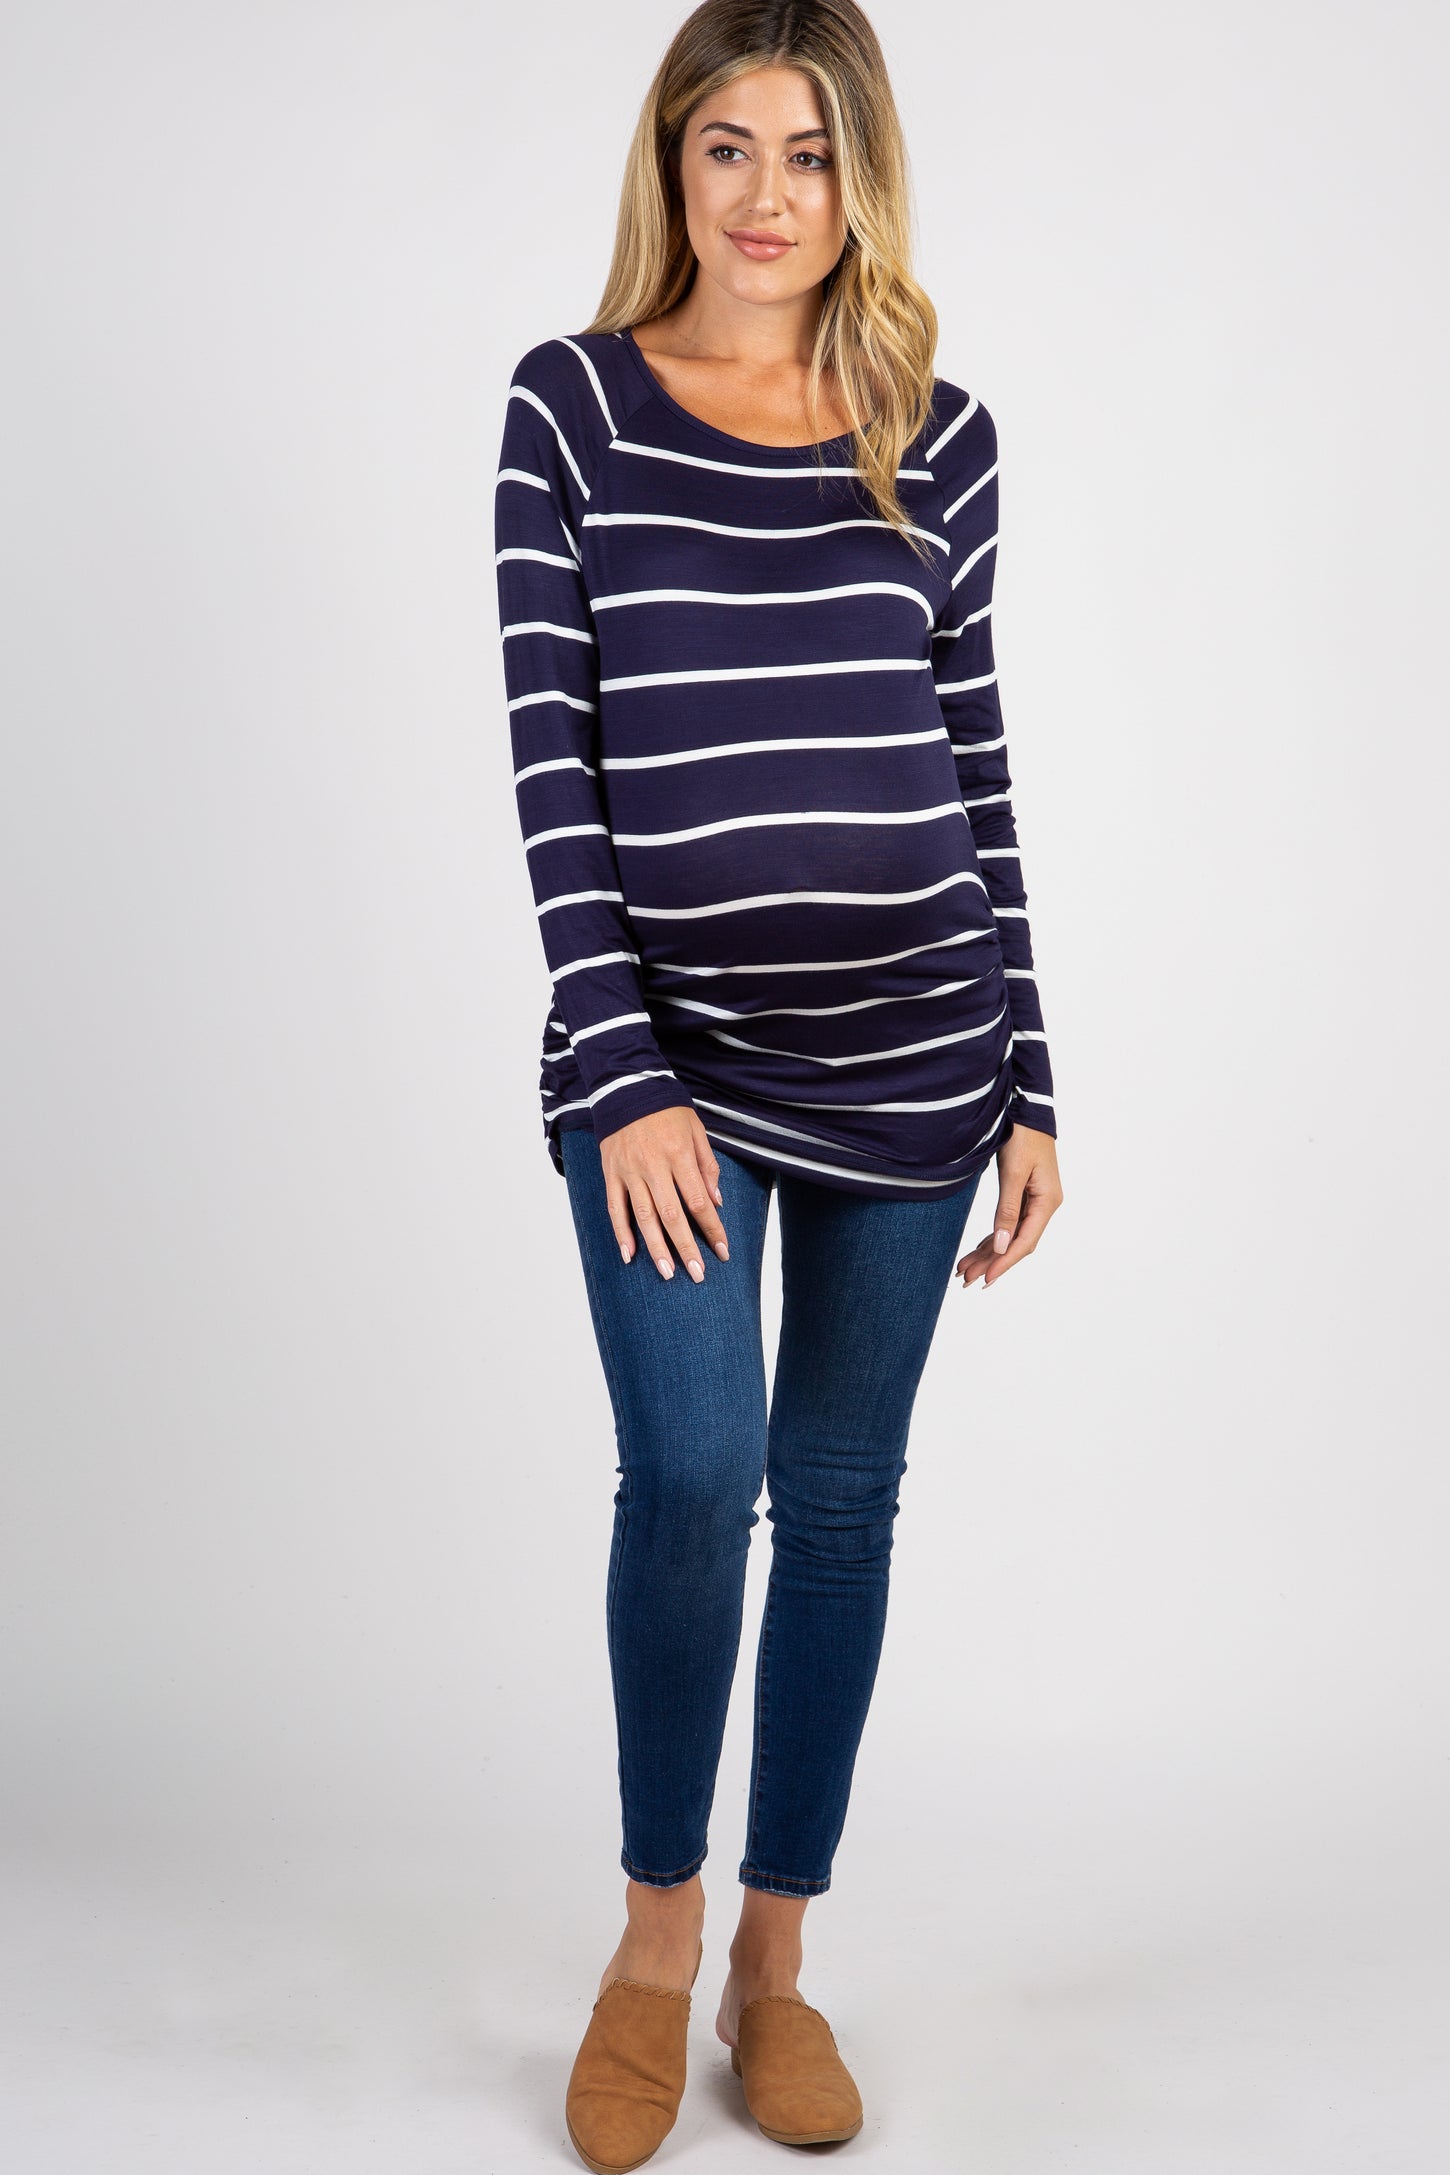 Navy Striped Ruched Maternity Top